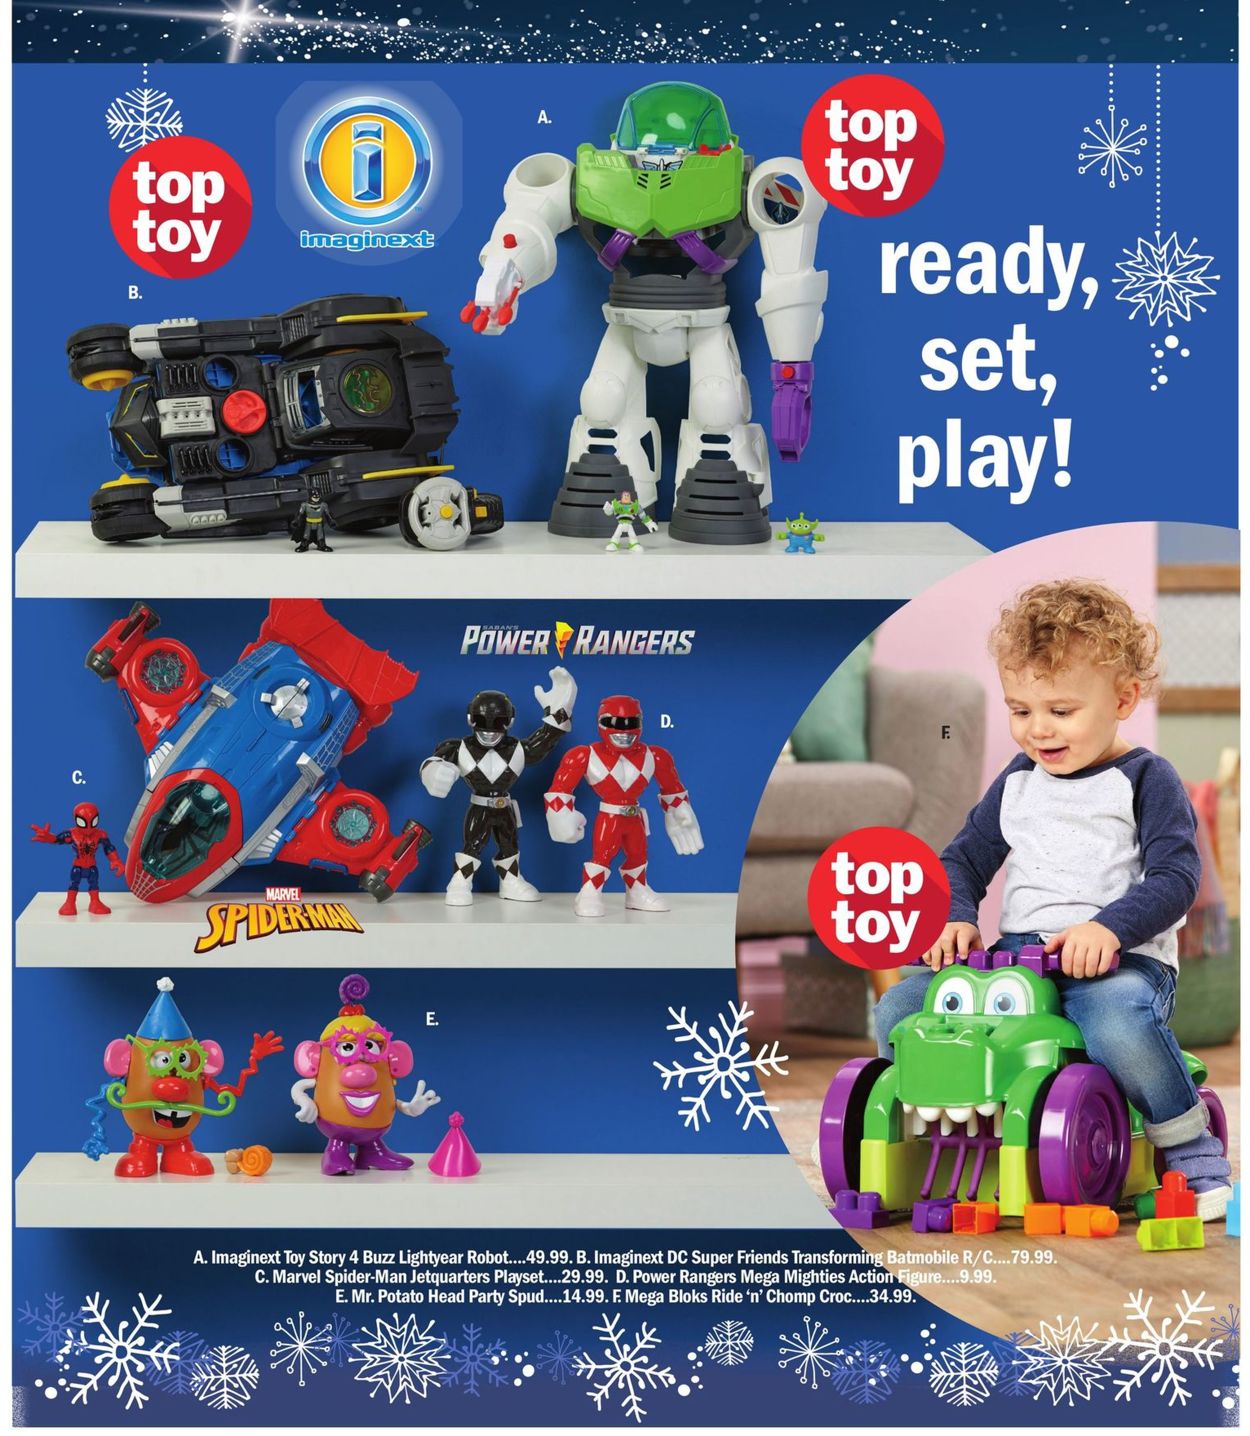 Meijer Current weekly ad 11/03 - 12/28/2019 [11] - frequent-ads.com